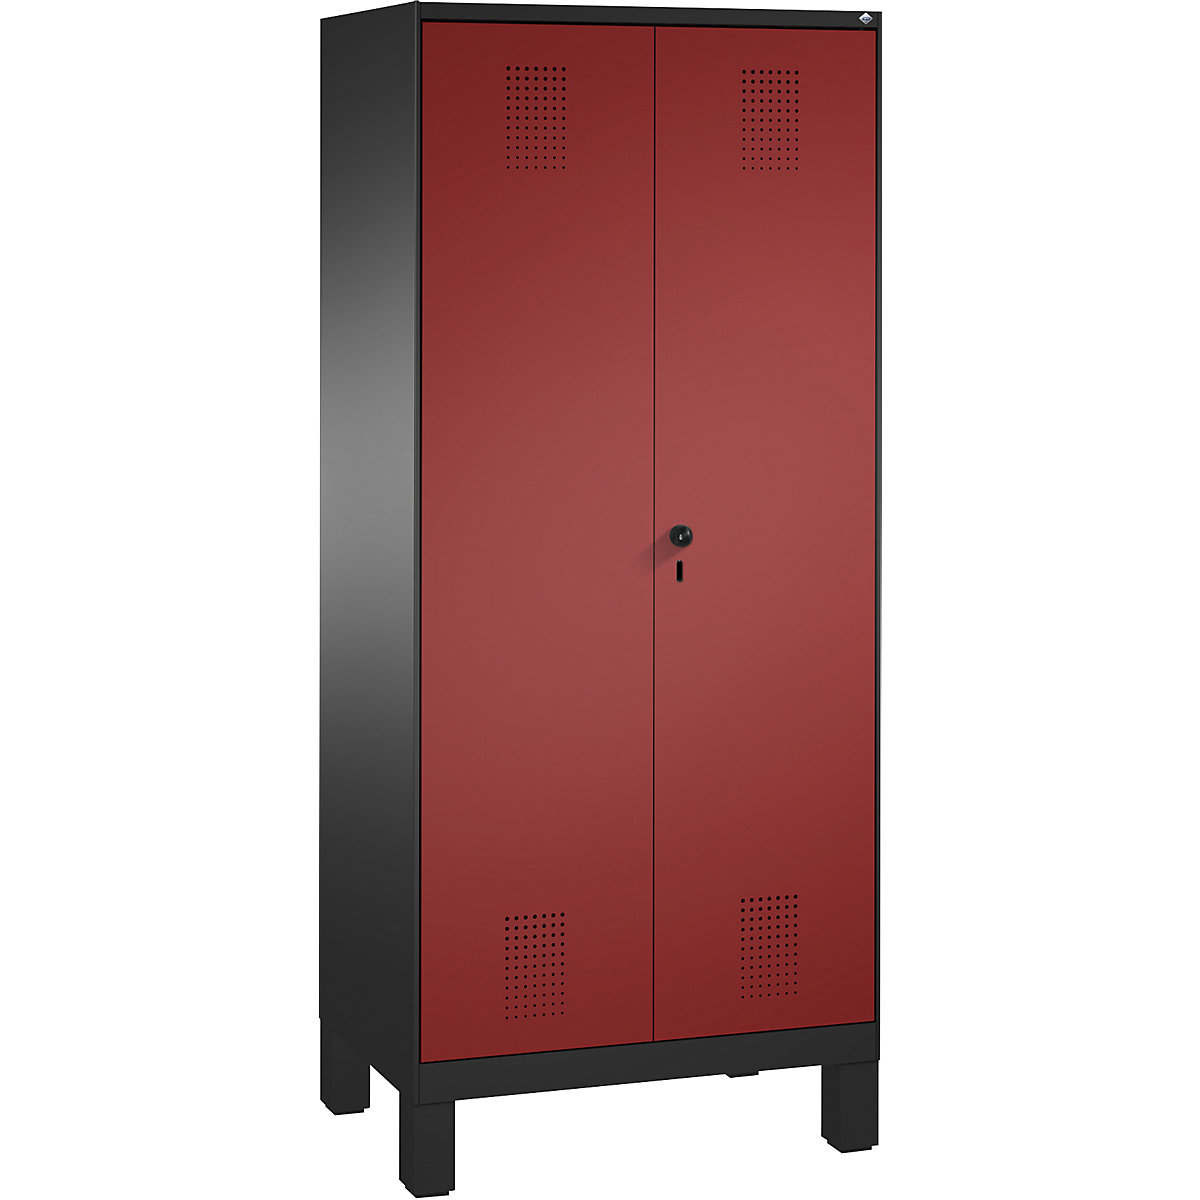 EVOLO cloakroom locker, doors close in the middle – C+P, 2 compartments, compartment width 400 mm, with feet, black grey / ruby red-15